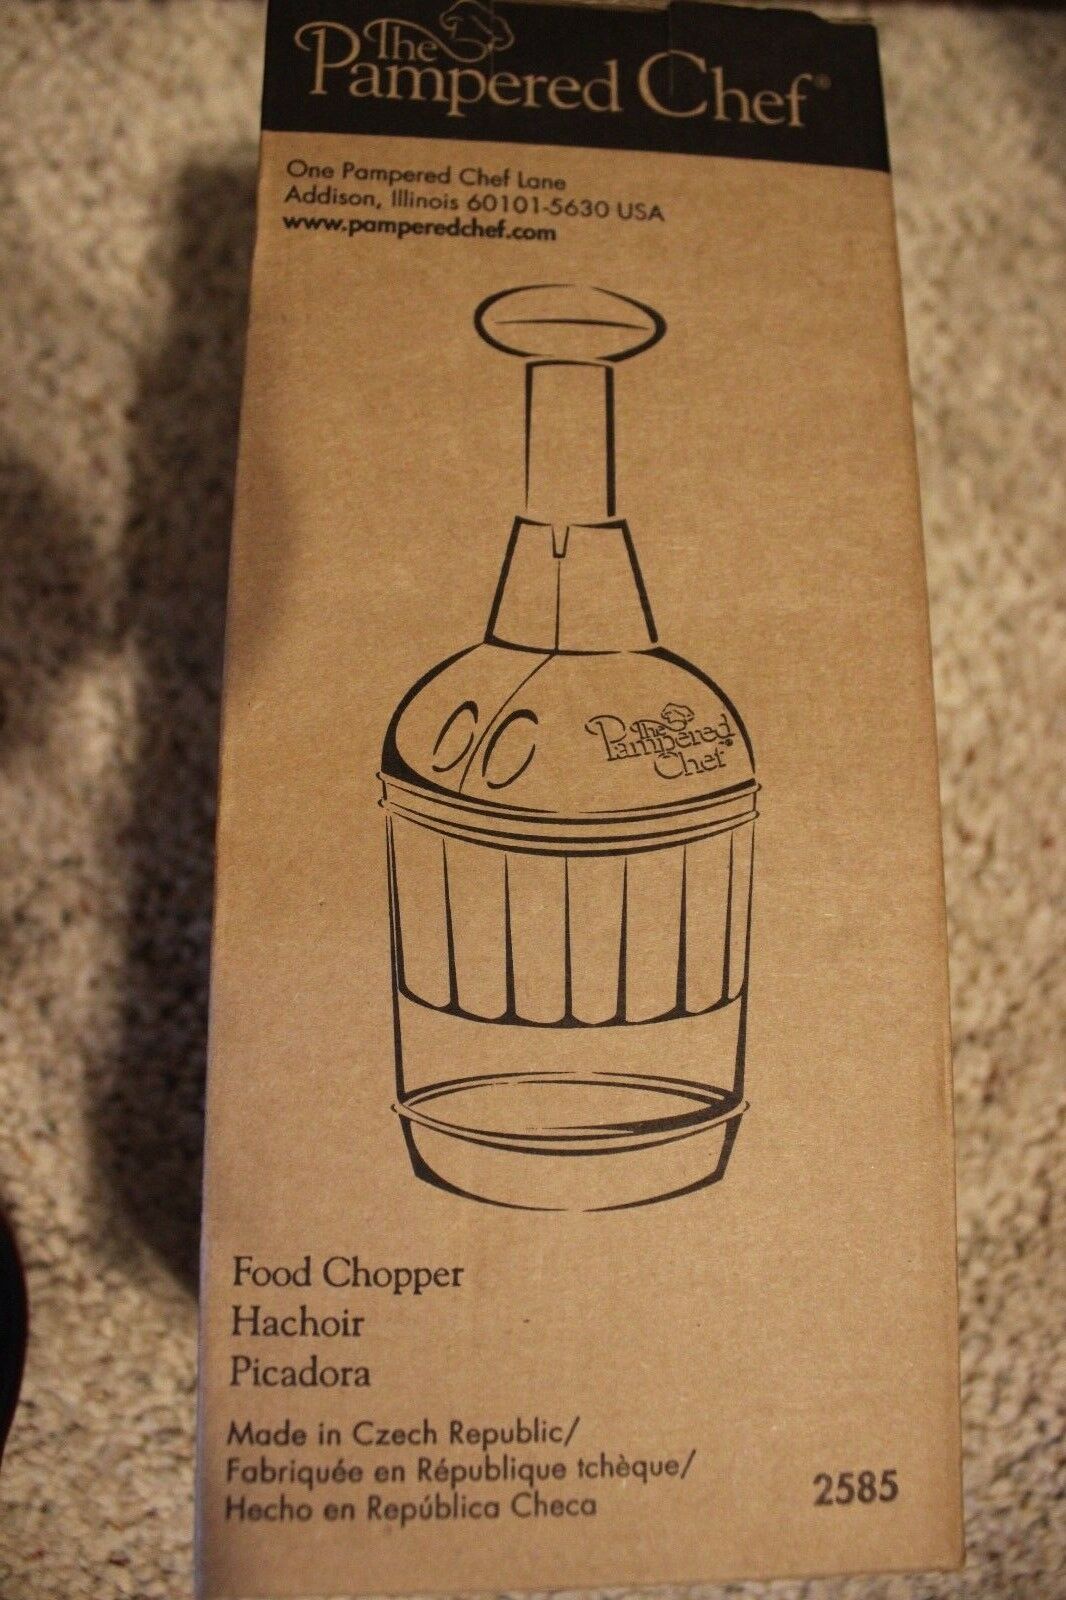 Pampered Chef Food Chopper #2585 Brand New In Box!  Free Shipping!